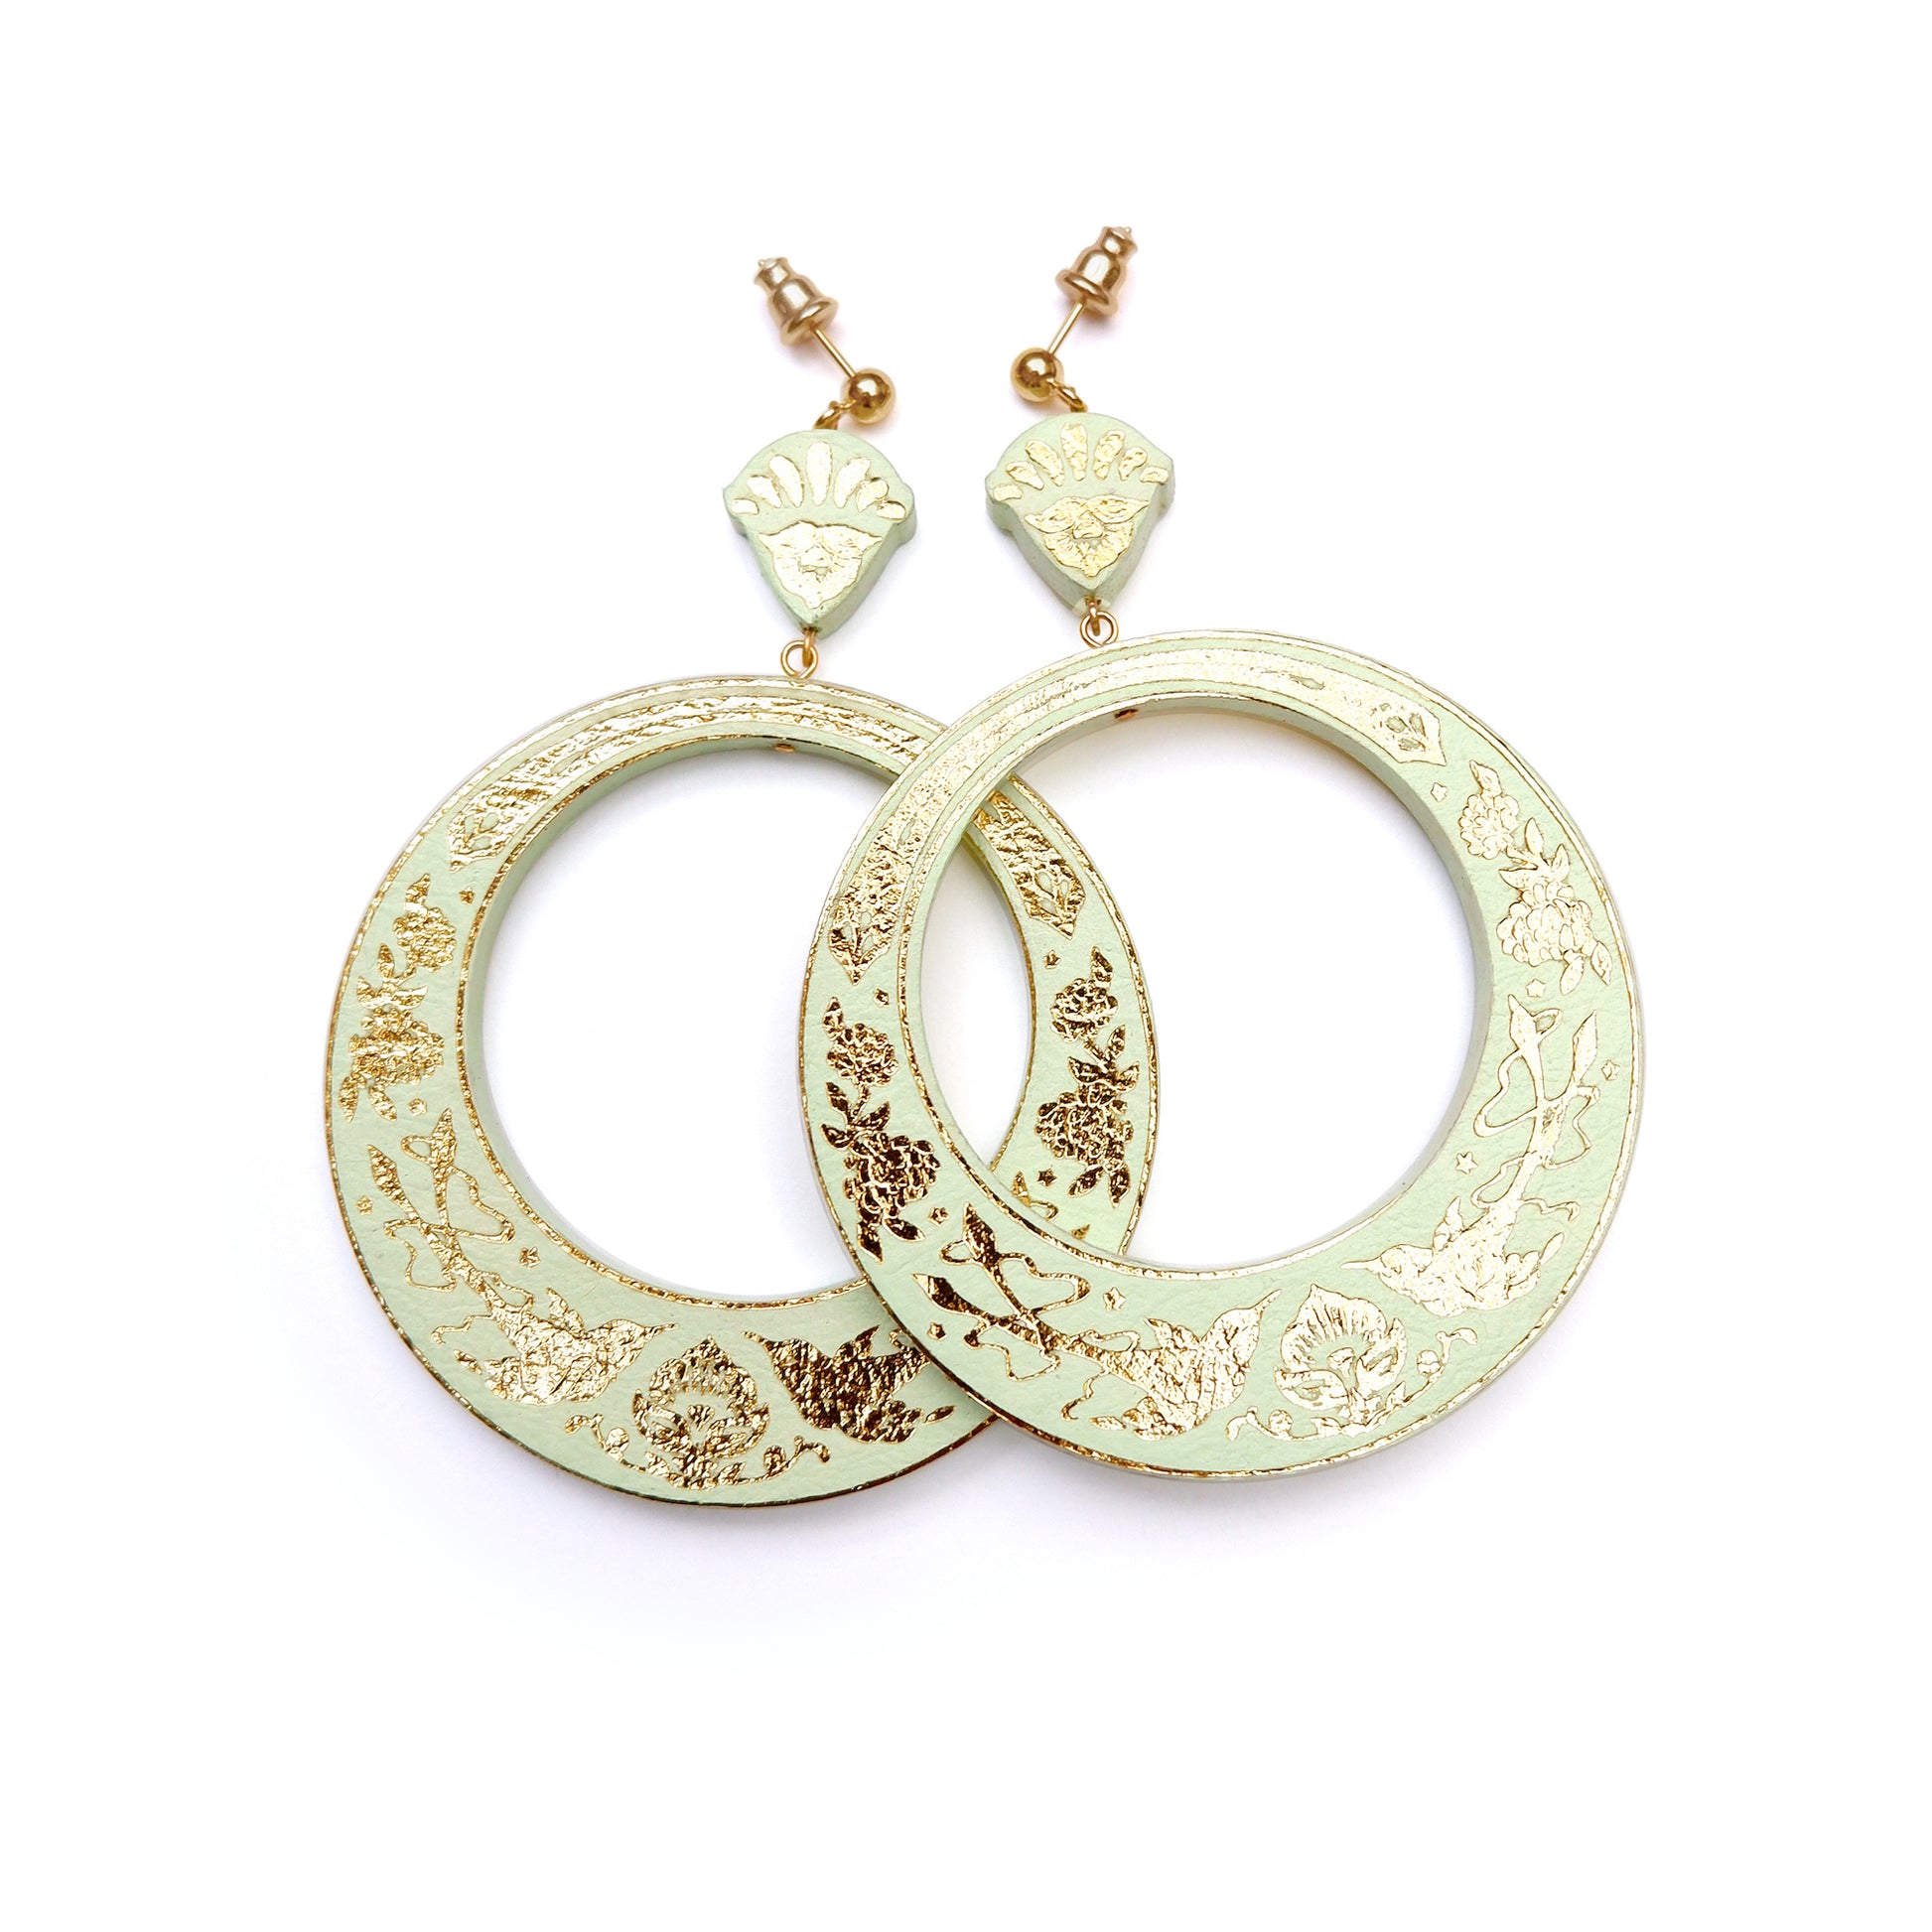 large hoops earring printed with birds & flowers in gold on pastel pistachio